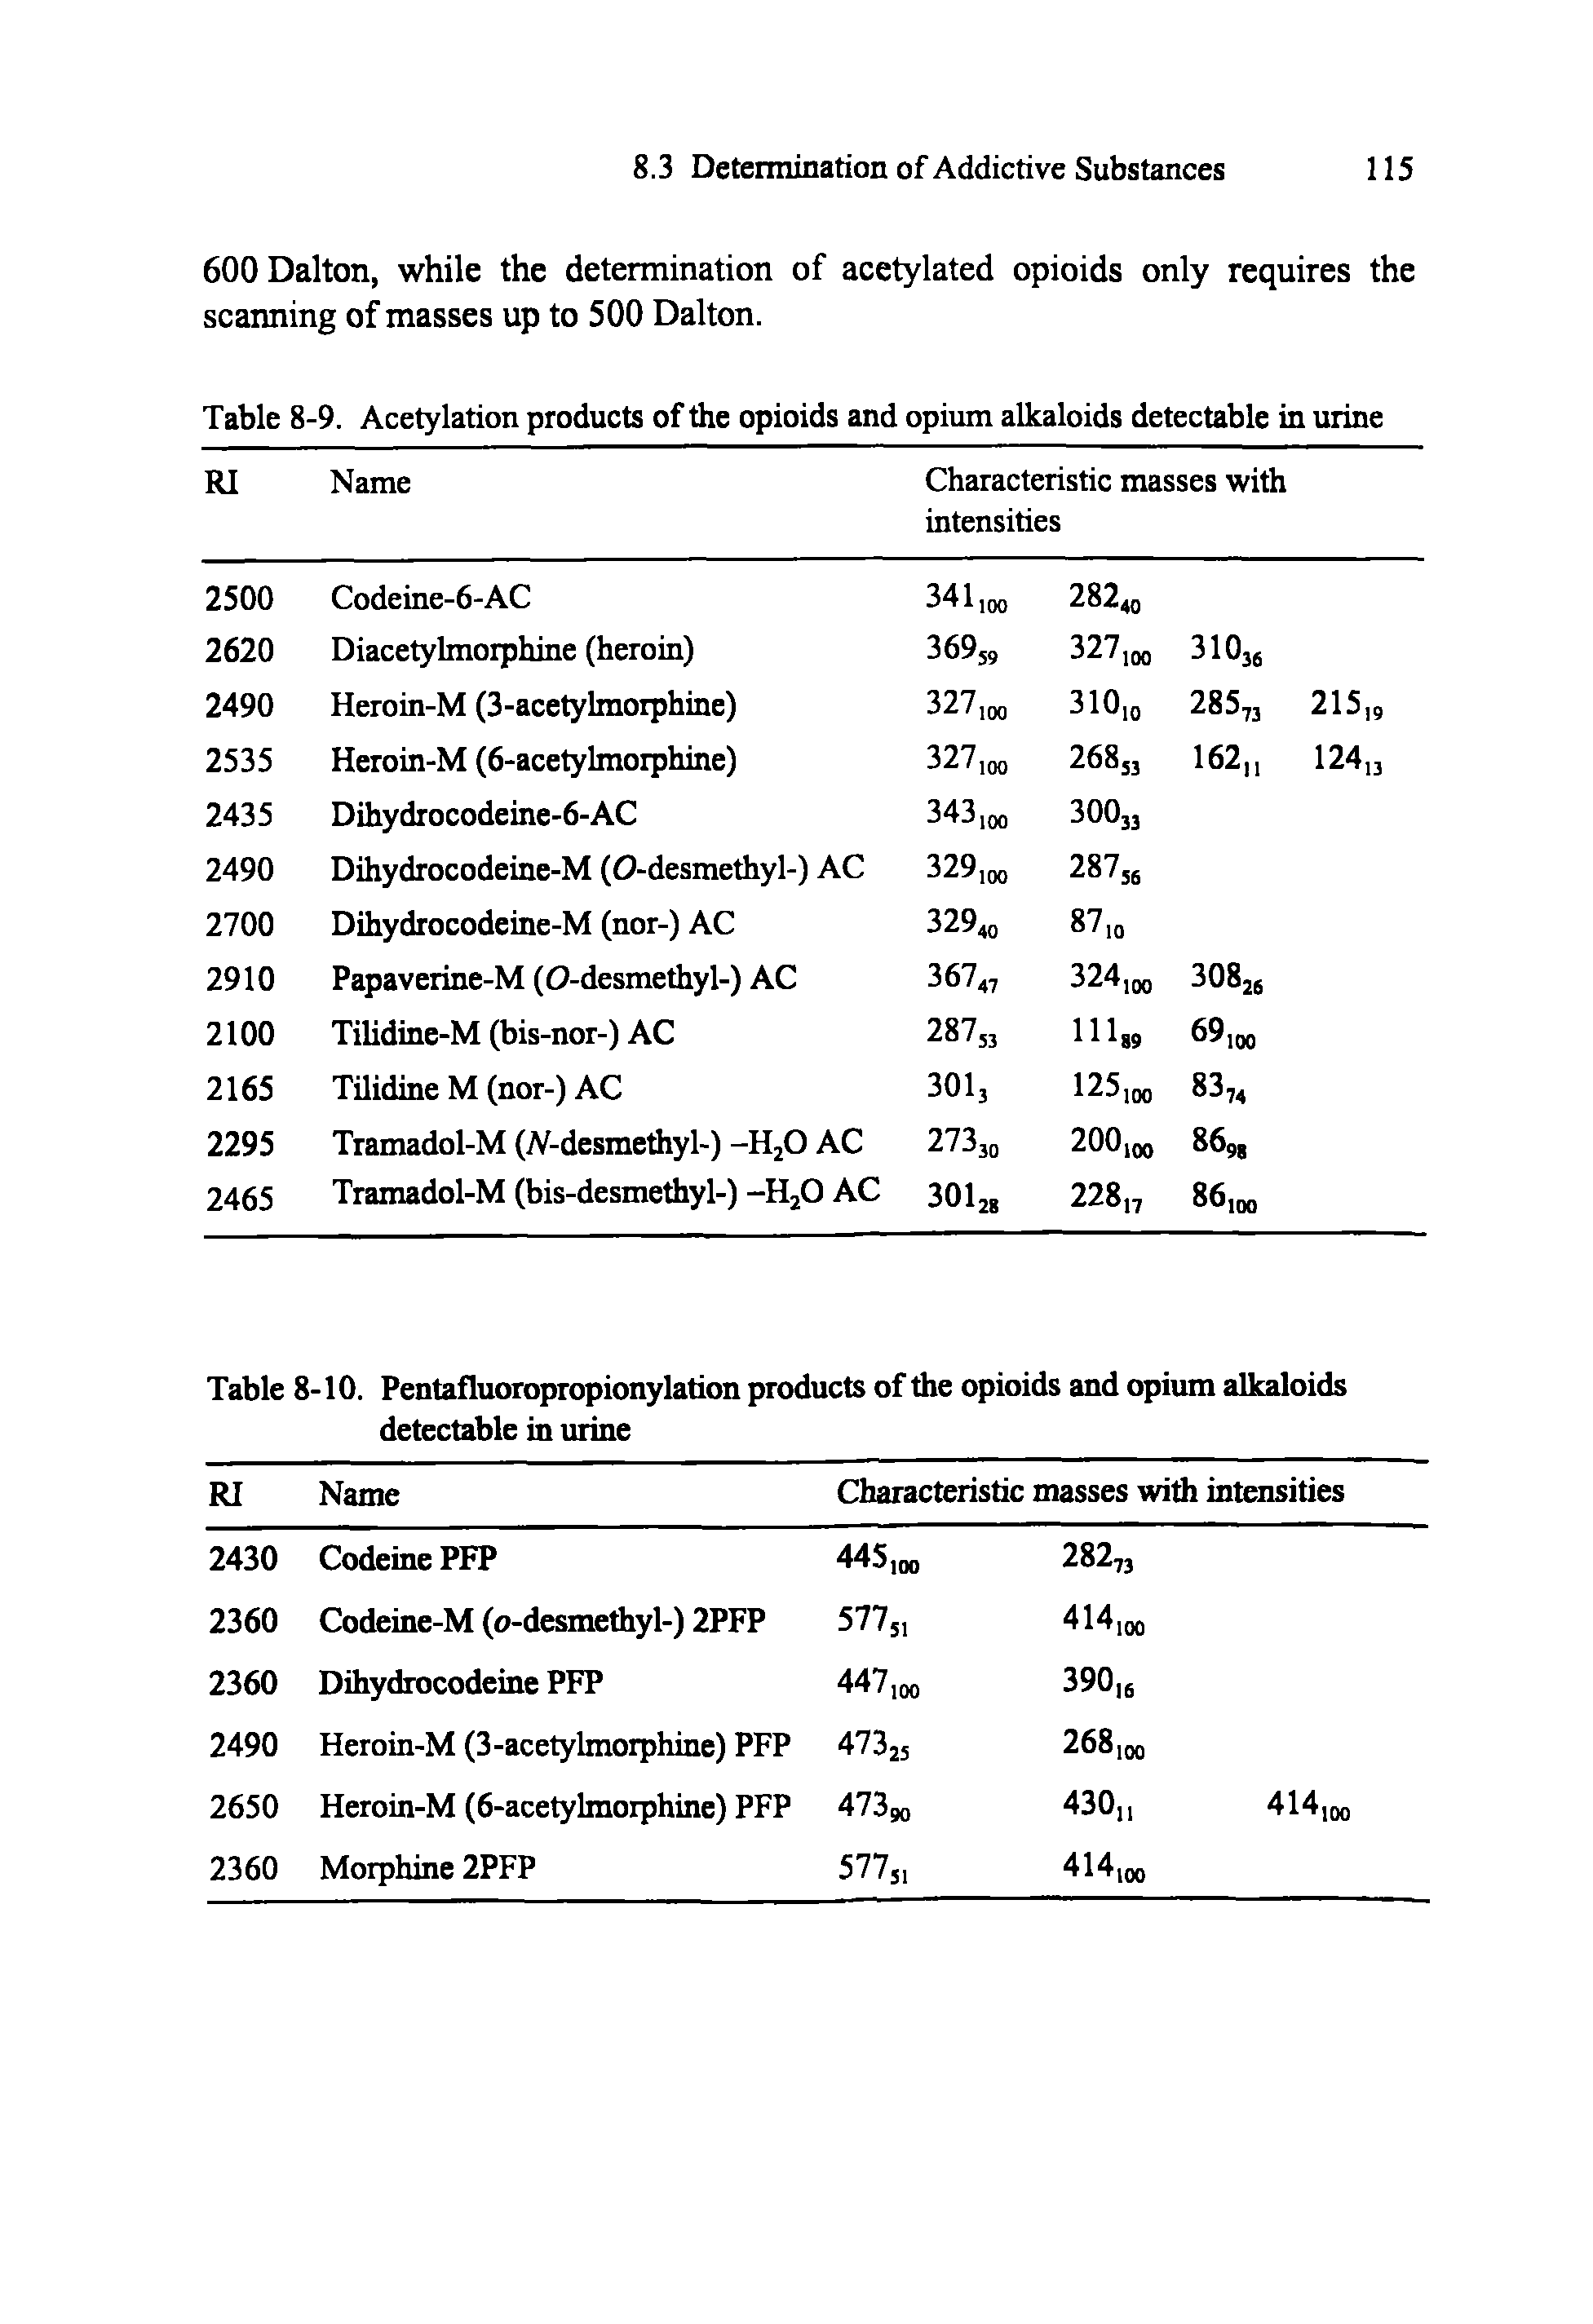 Table 8-9. Acetylation products of the opioids and opium alkaloids detectable in urine...